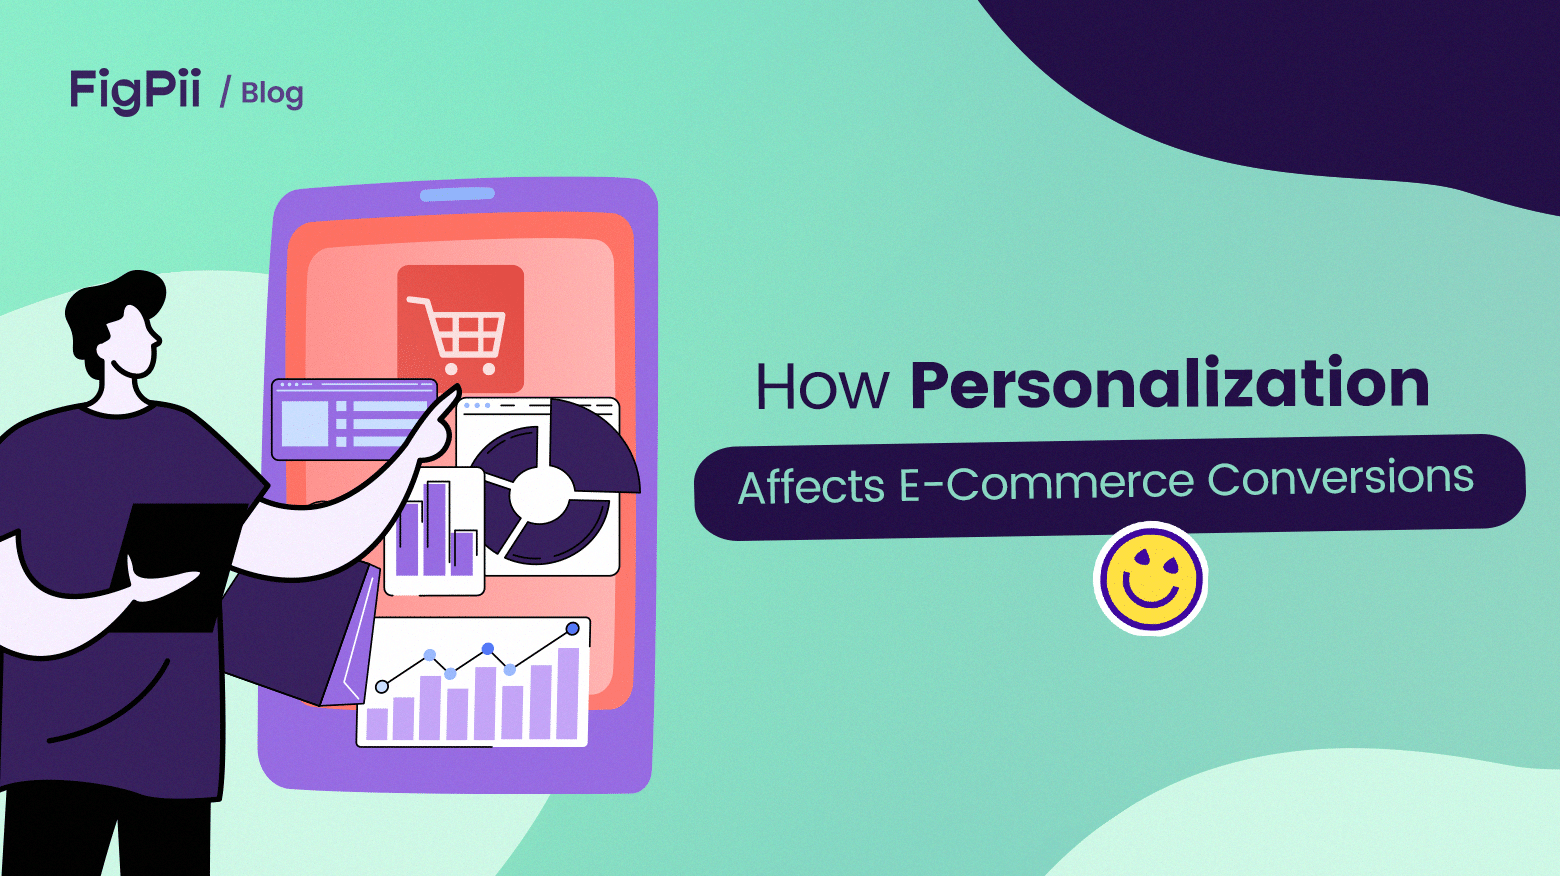 A featured image for an article on Impacts of Personalization on Ecommerce Conversion.